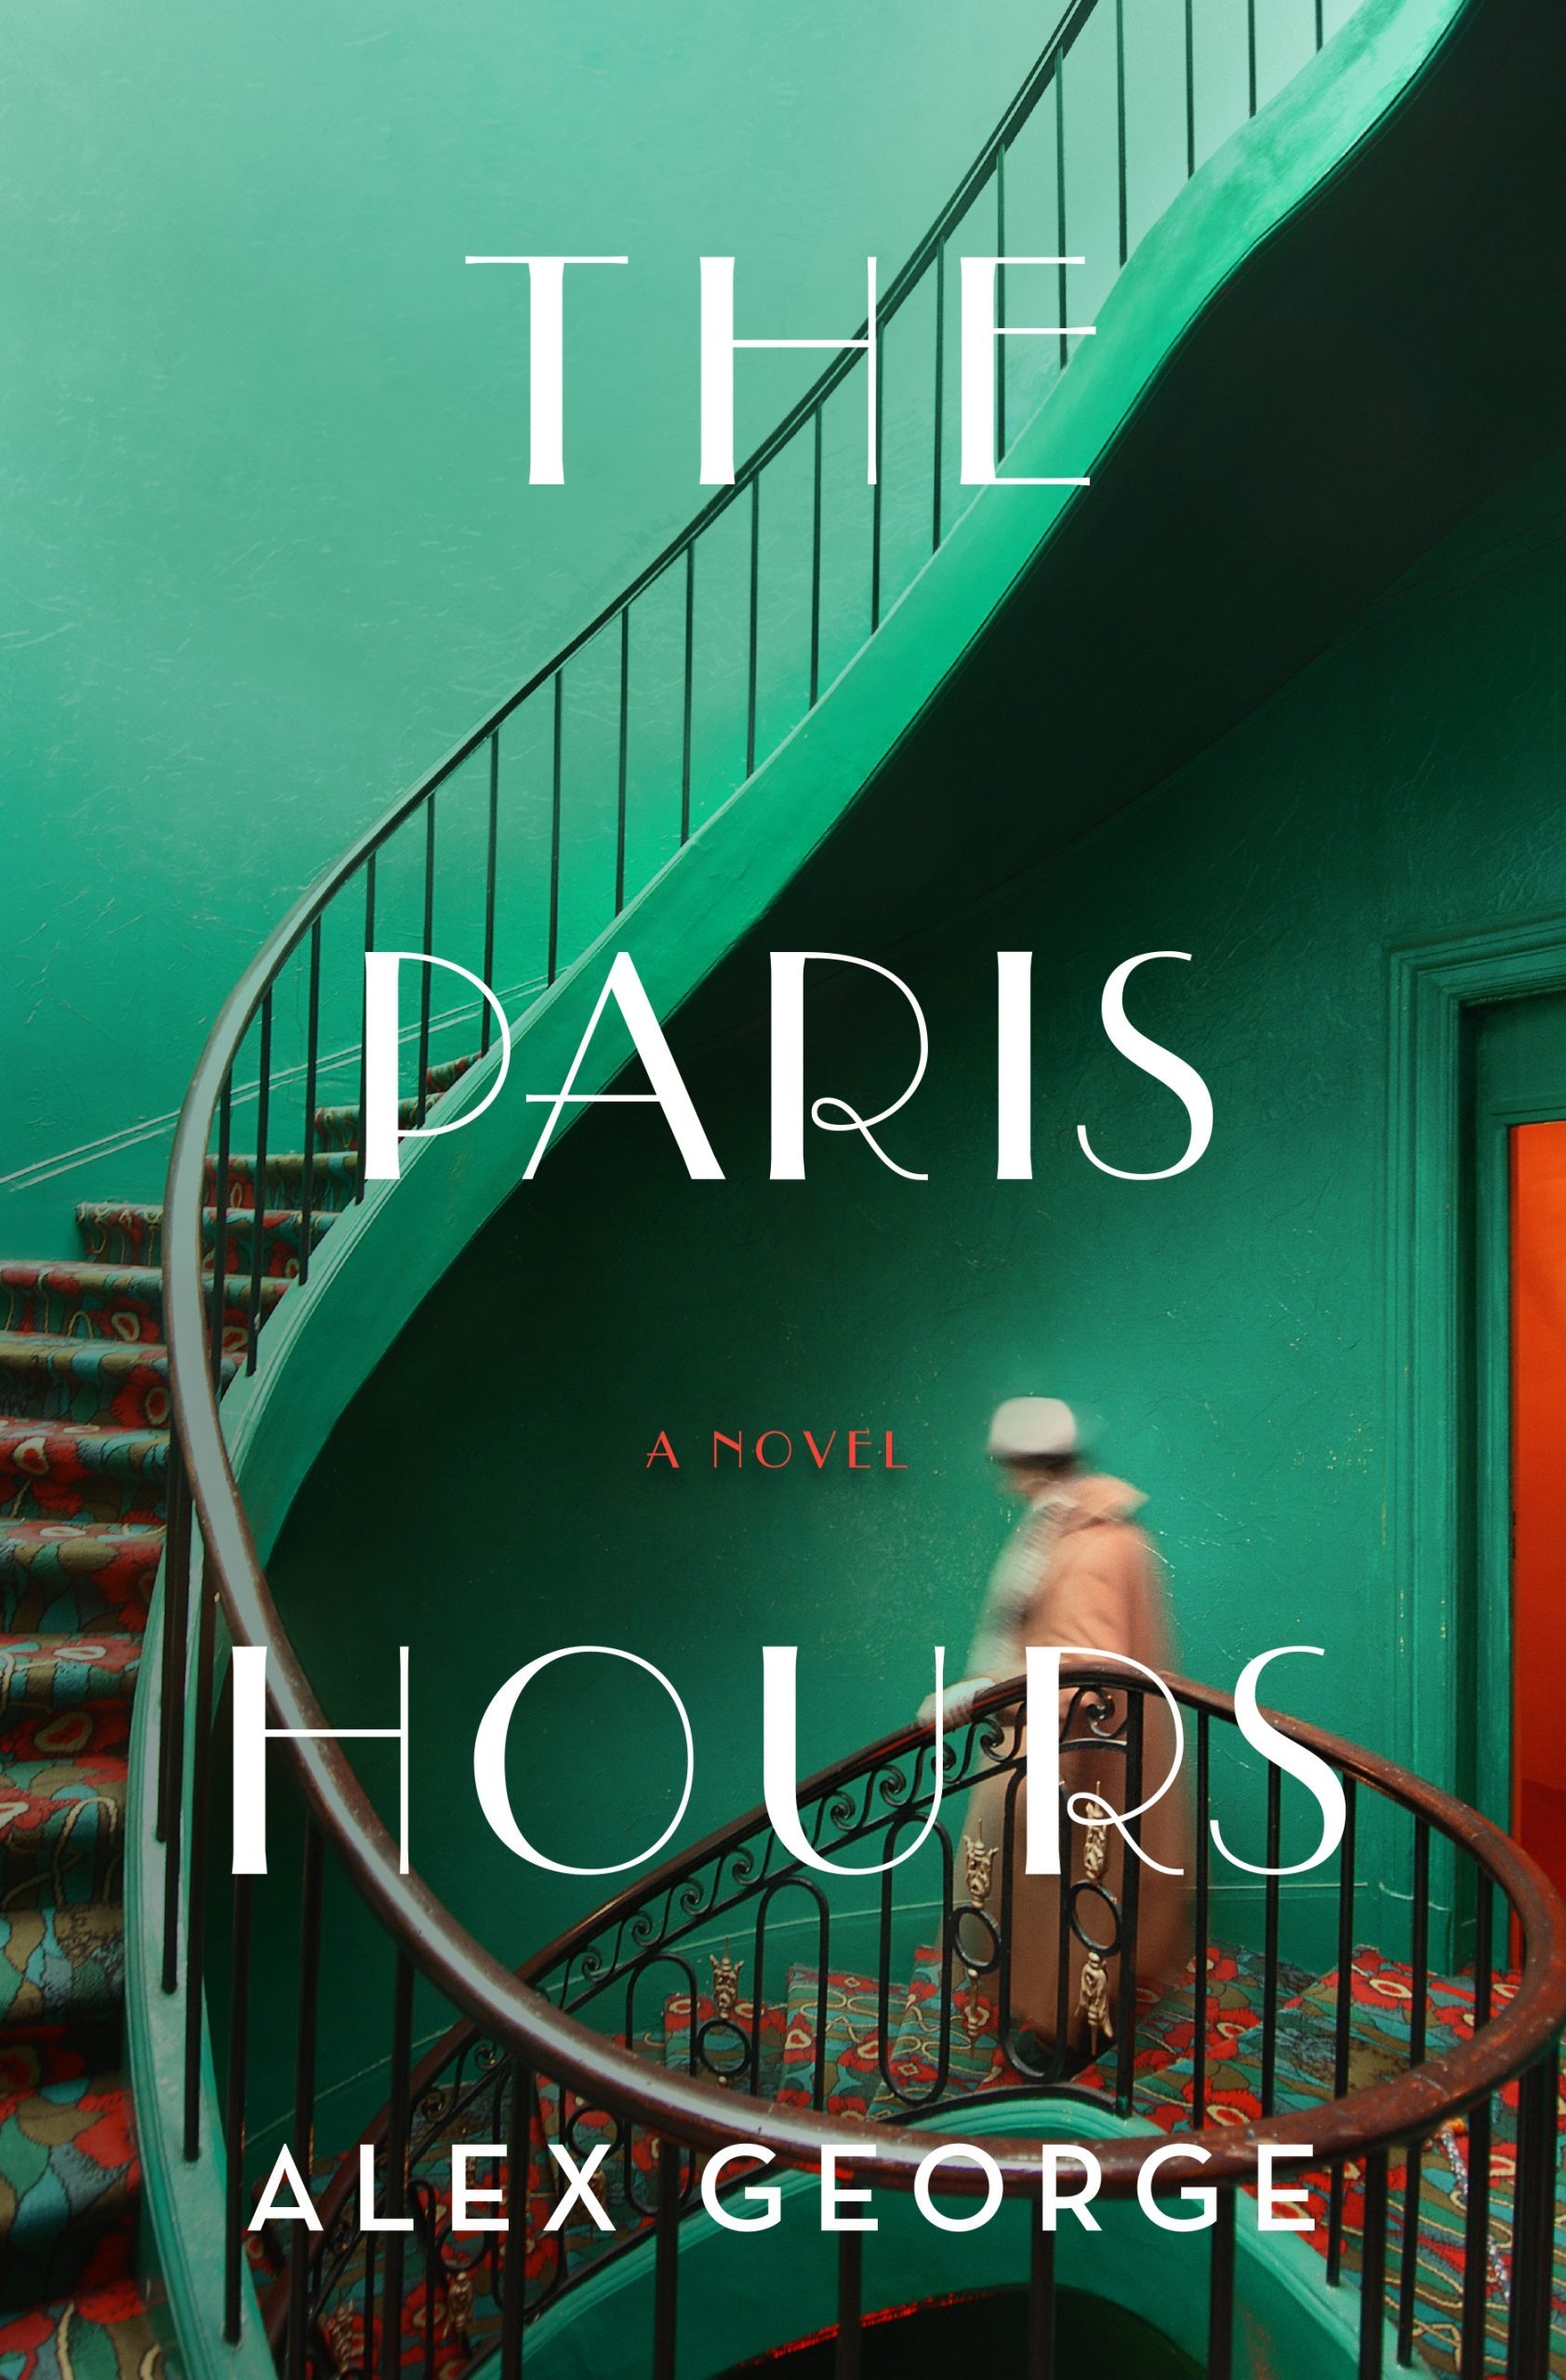 When Does The Paris Hours By Alex George Come Out? 2020 Historical Fiction Releases